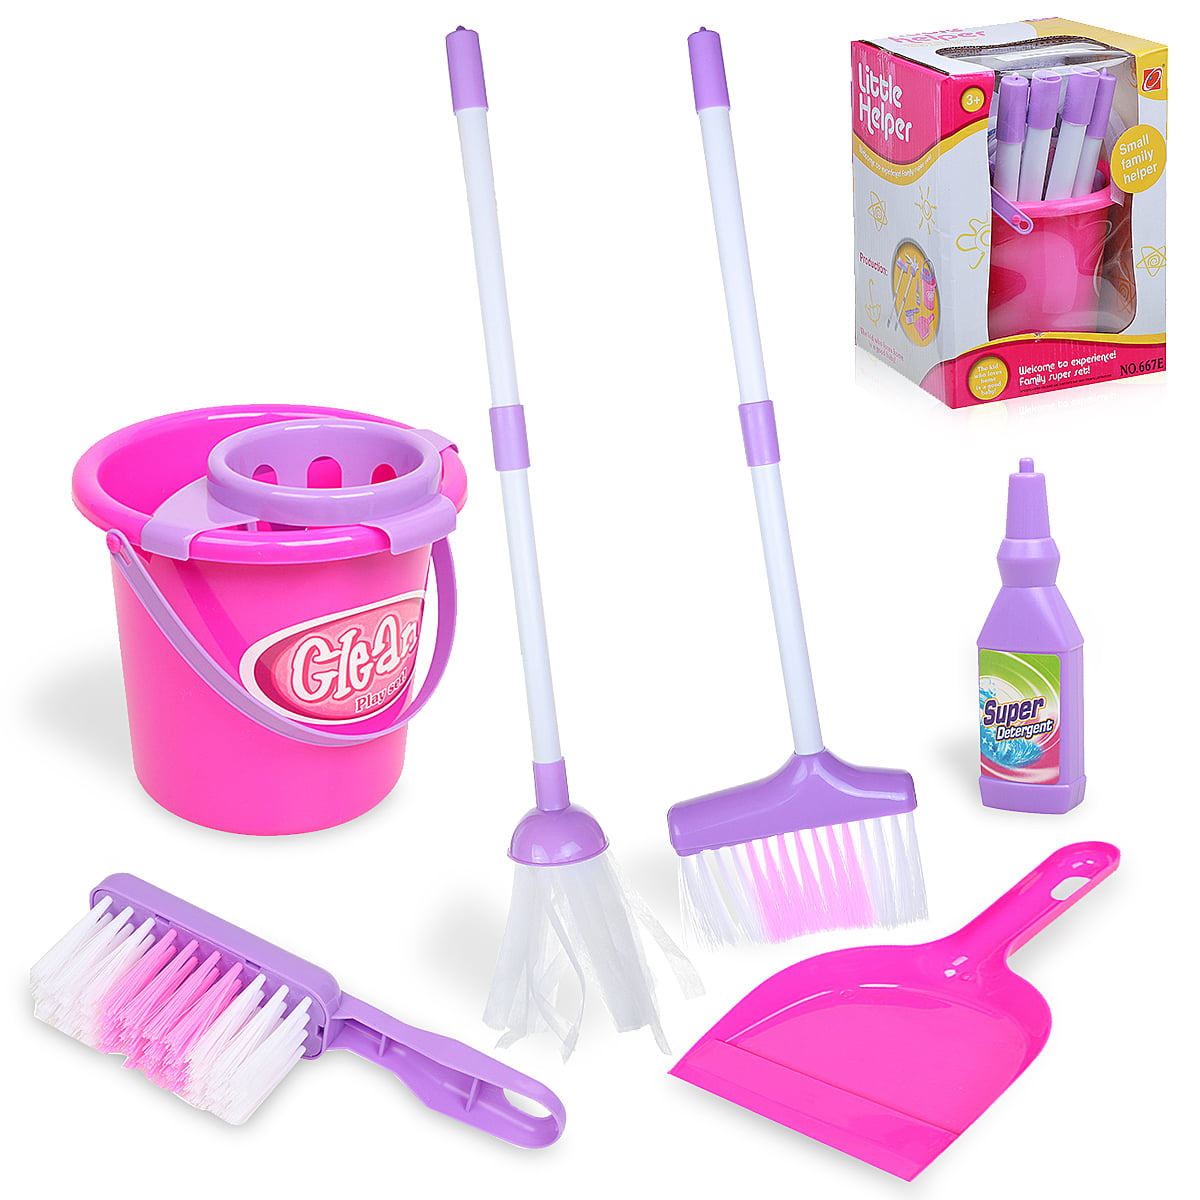 Girls Role Play Cleaning Cleaner Toy Pink Bucket Dust Pan Brush Toy Set Kid Gift 